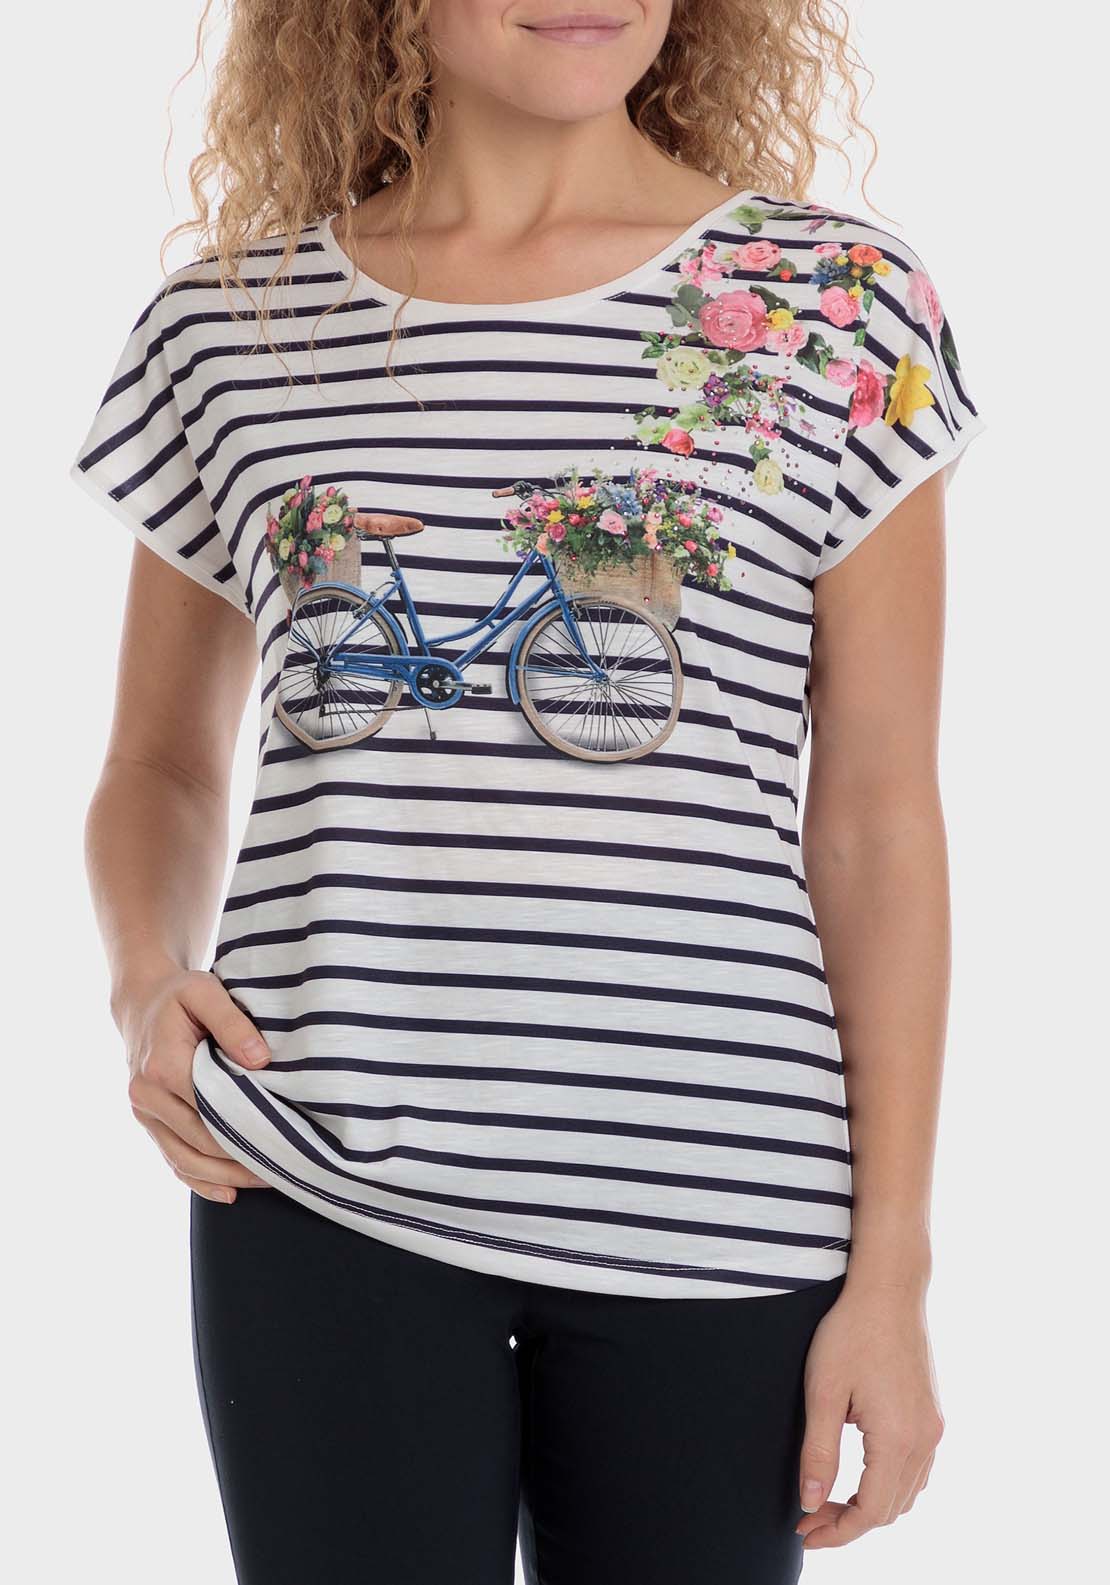 Punt Roma Floral Striped T-Shirt 1 Shaws Department Stores